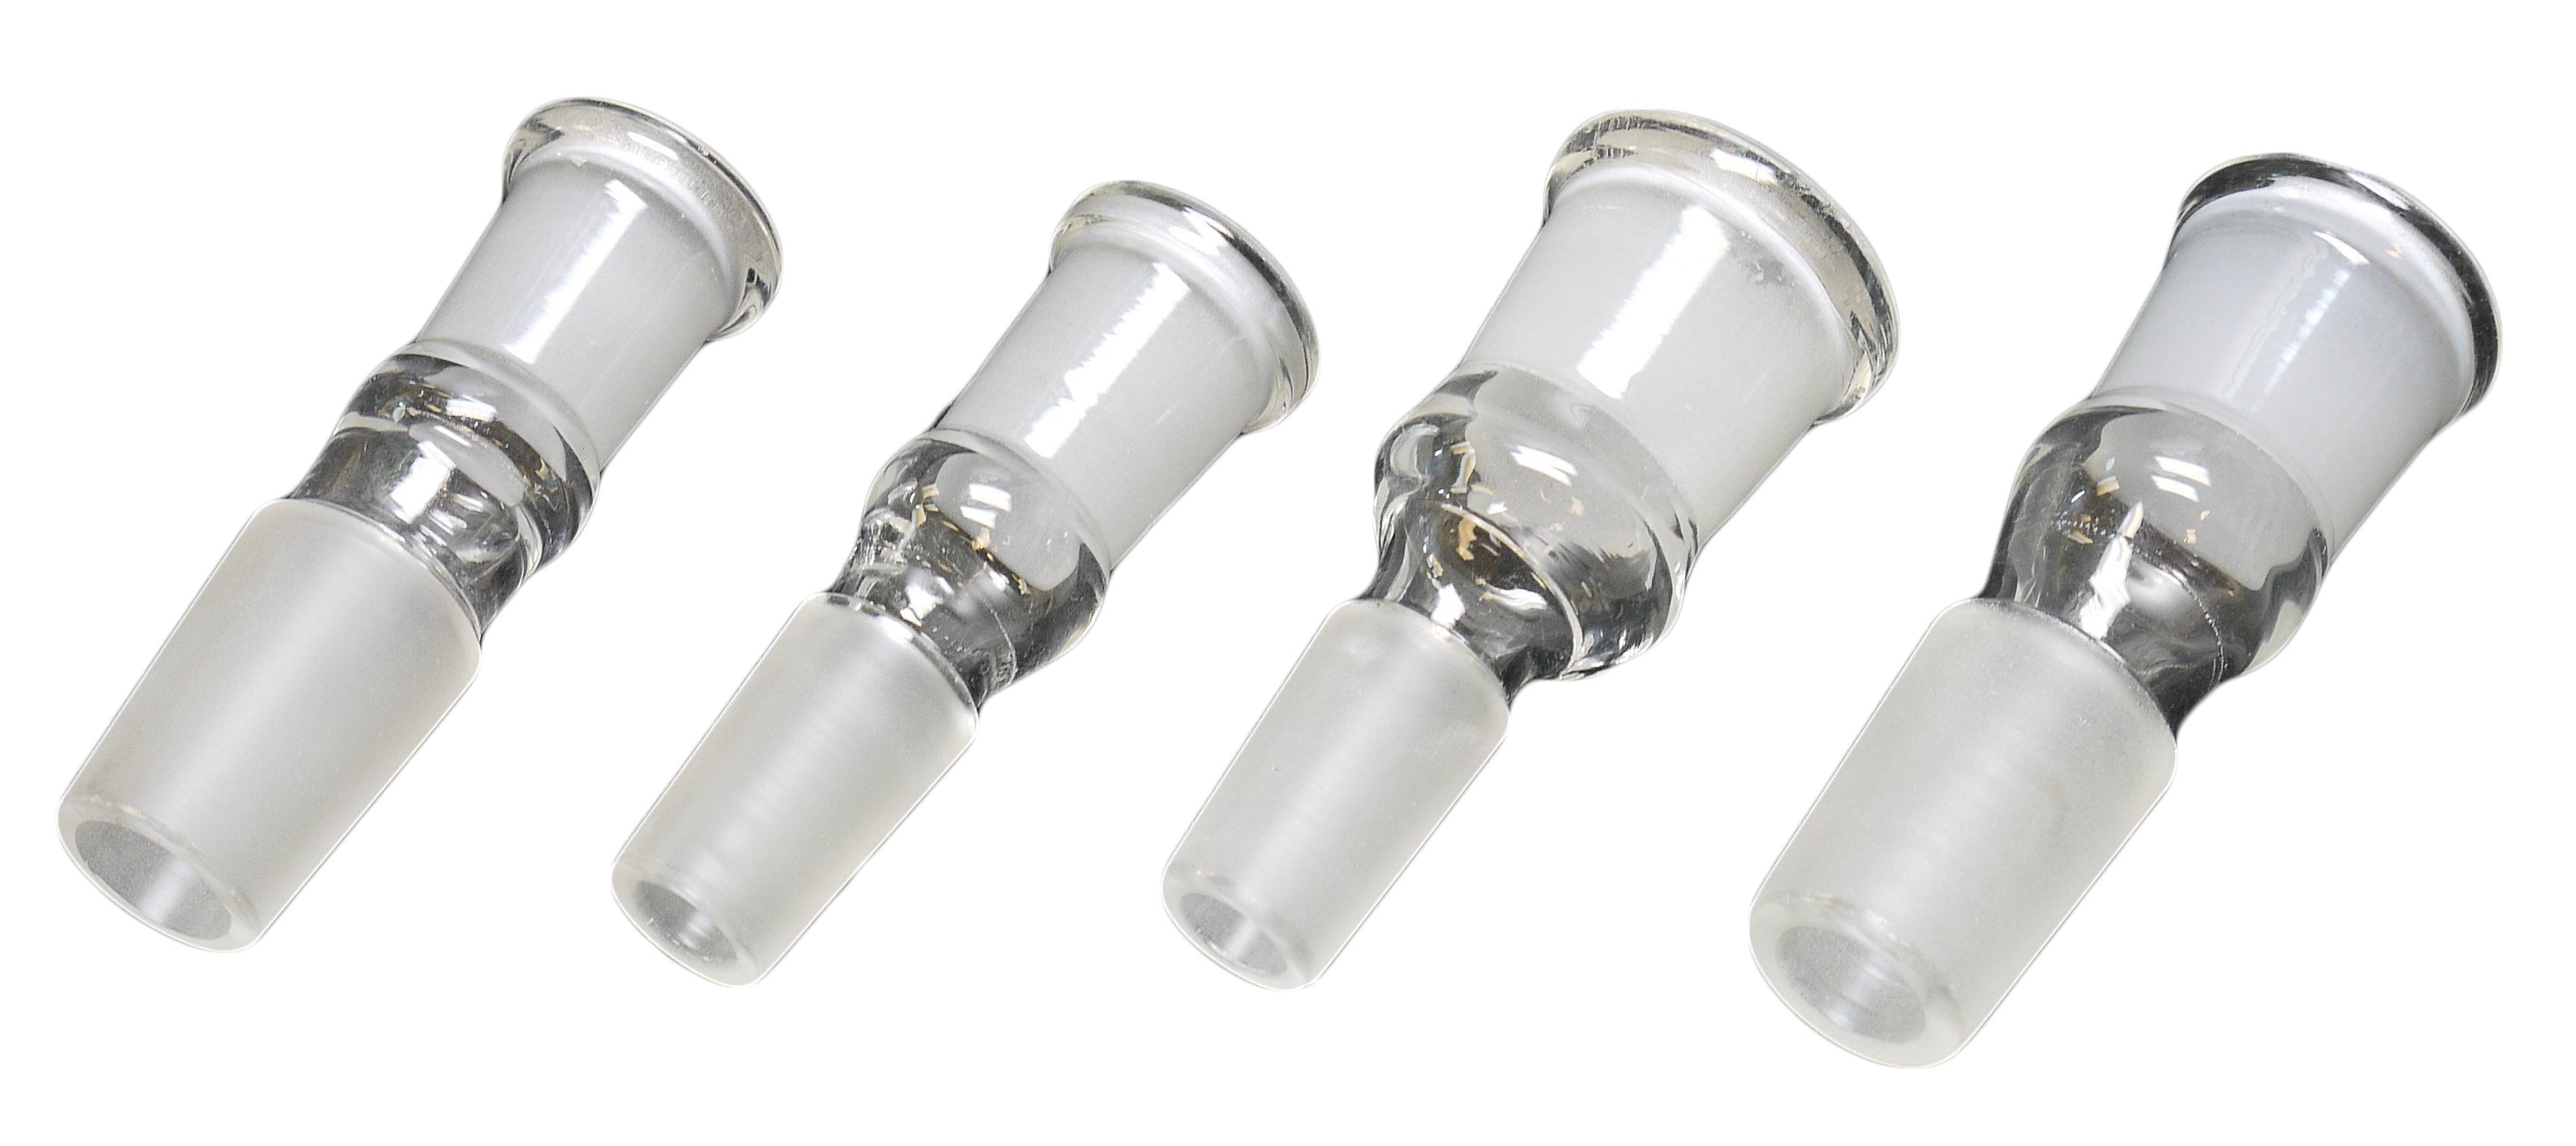 Male to Female connector 19mm to 19mm